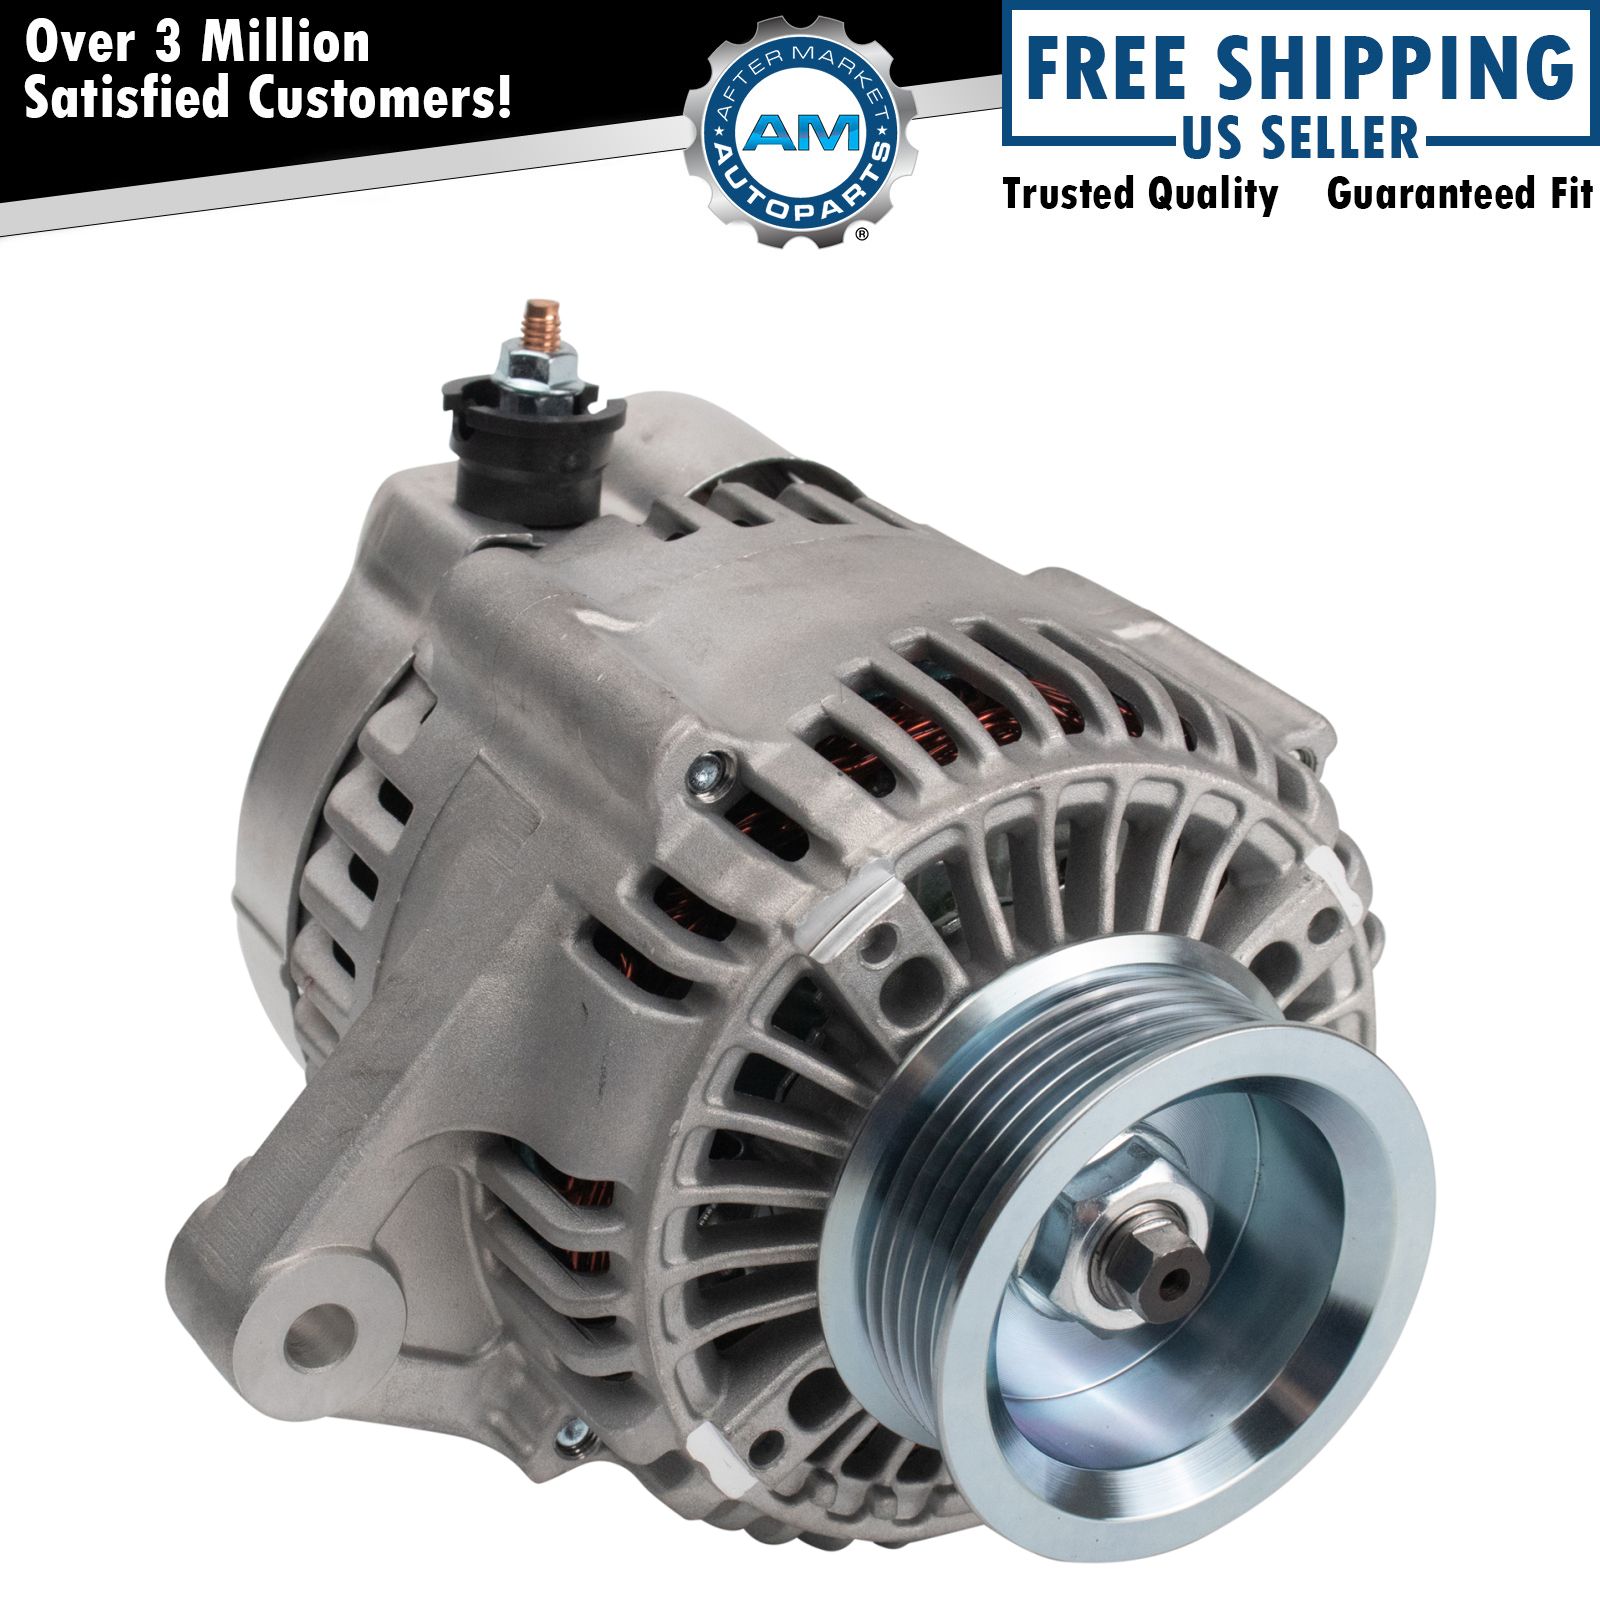 New Replacement Alternator For 98- 02 Acura CL Honda Accord L4 2.3L